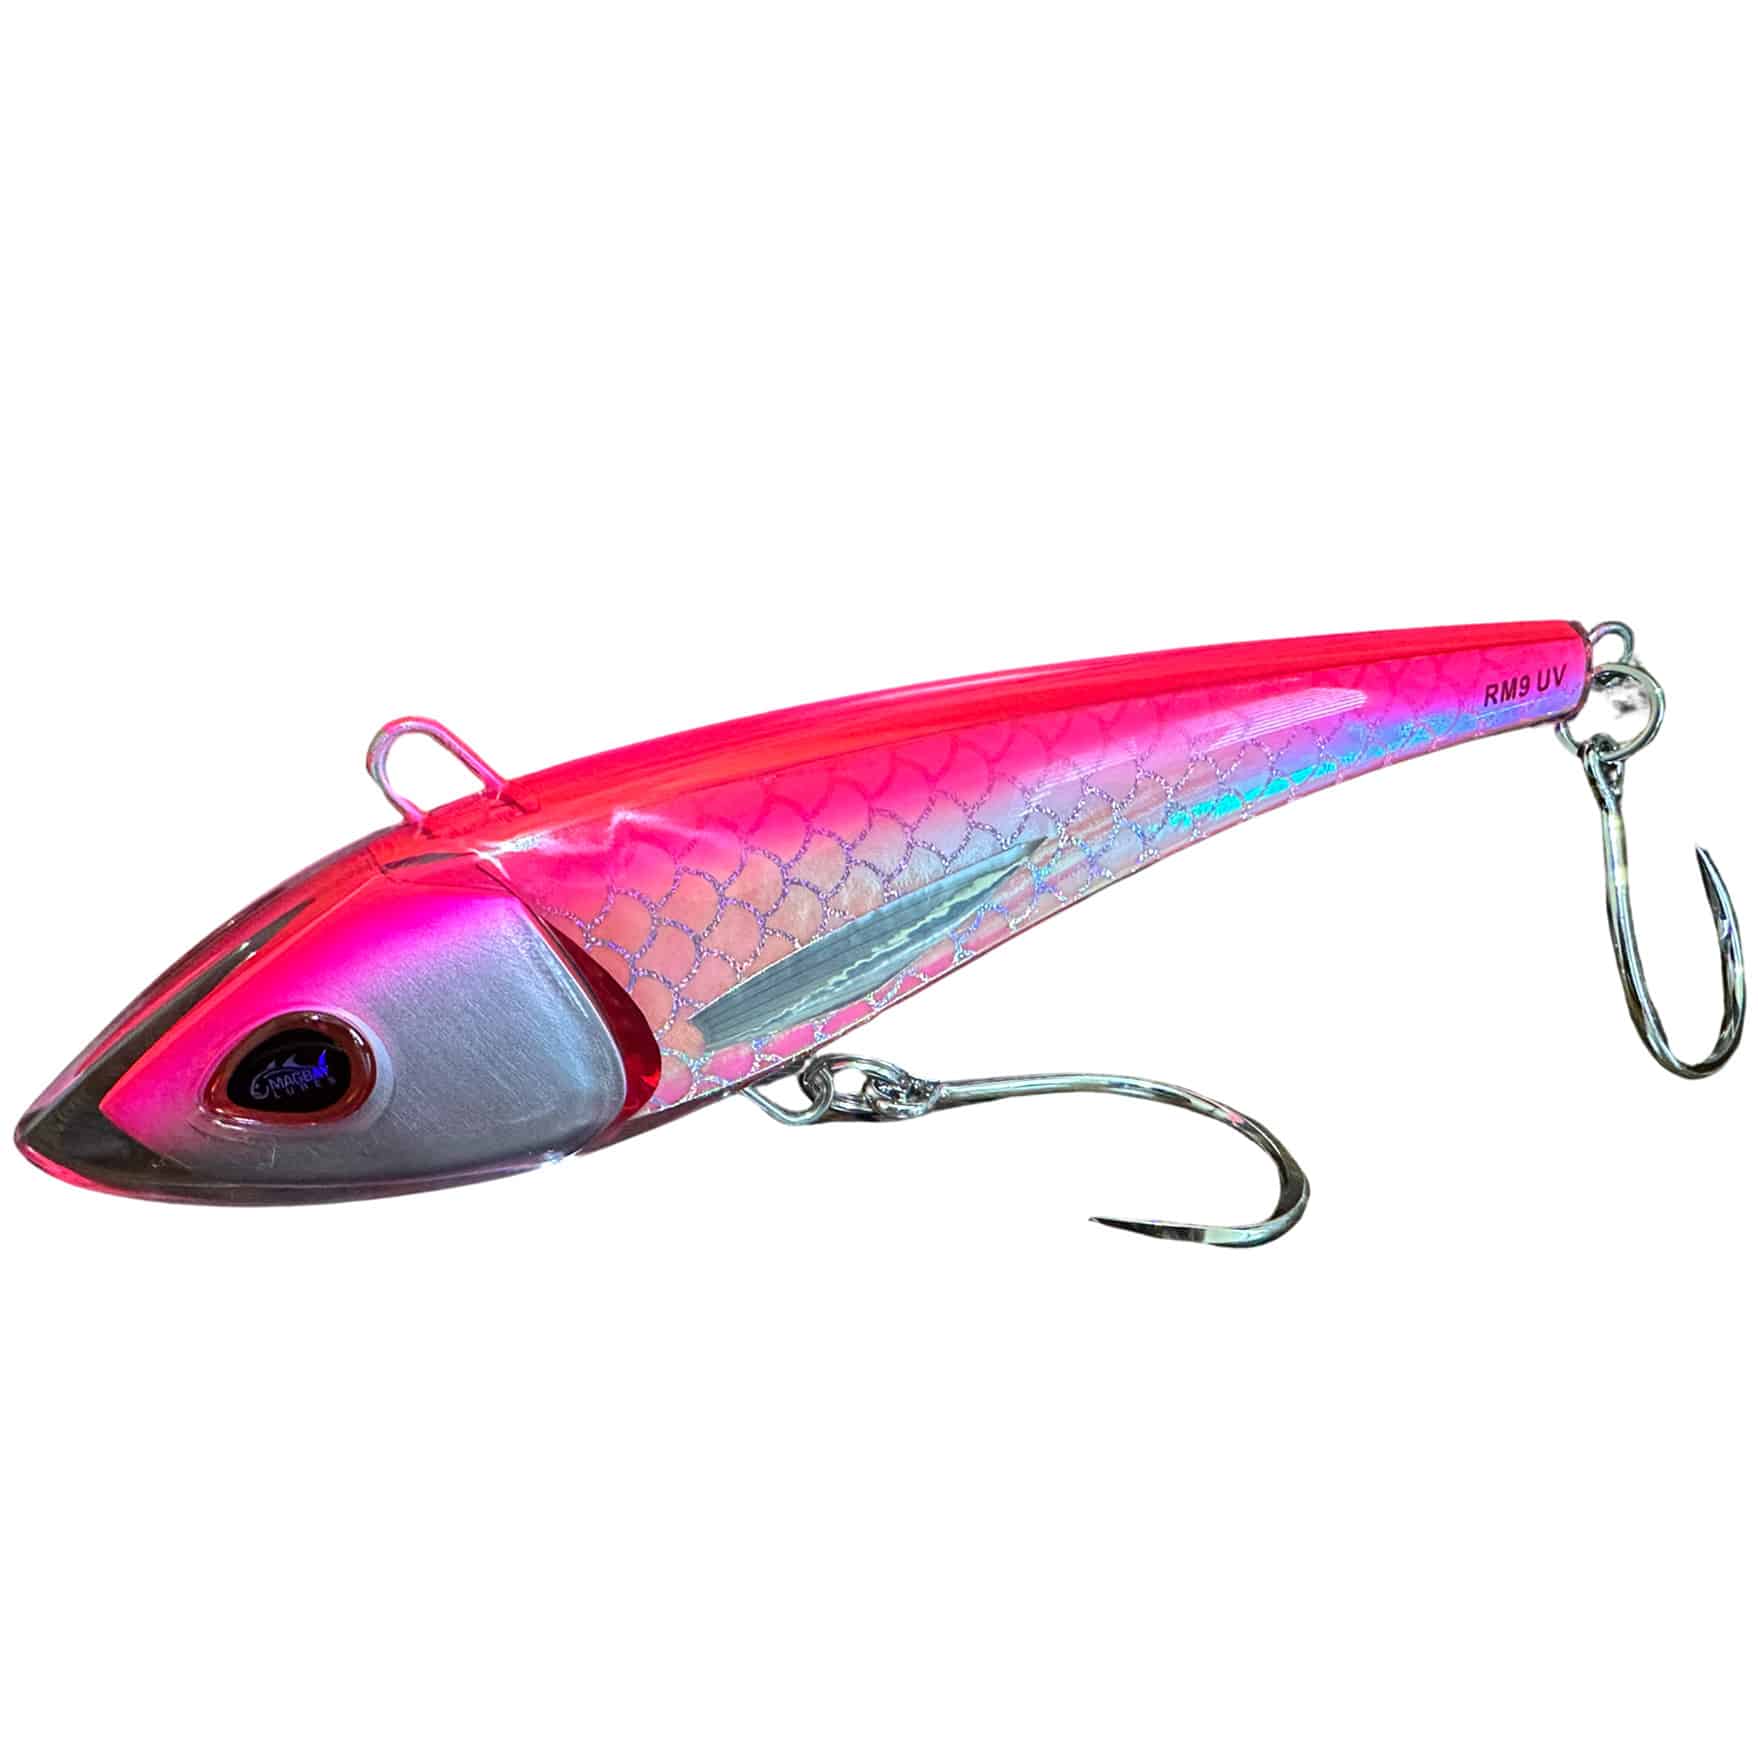 Dynamic Lures - 🤩𝐋𝐢𝐦𝐢𝐭𝐞𝐝 𝐑𝐞𝐥𝐞𝐚𝐬𝐞 - 𝐍𝐄𝐖 𝐂𝐎𝐋𝐎𝐑 9 Mile  Goby